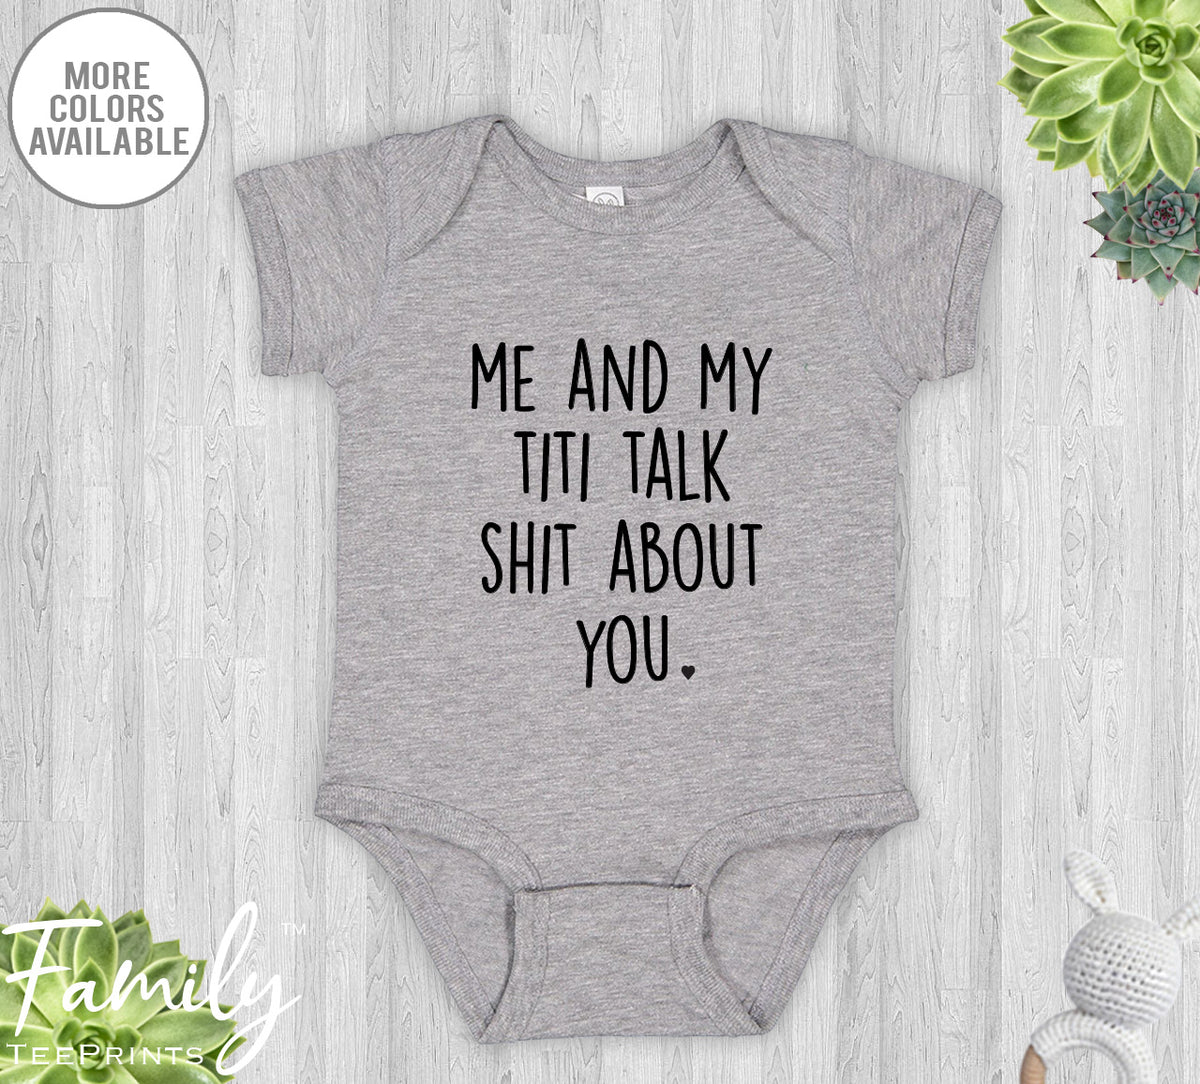 Me And My Titi Talk Sh*t About You - Baby Onesie - Funny Baby Bodysuit - Baby Gift From Titi